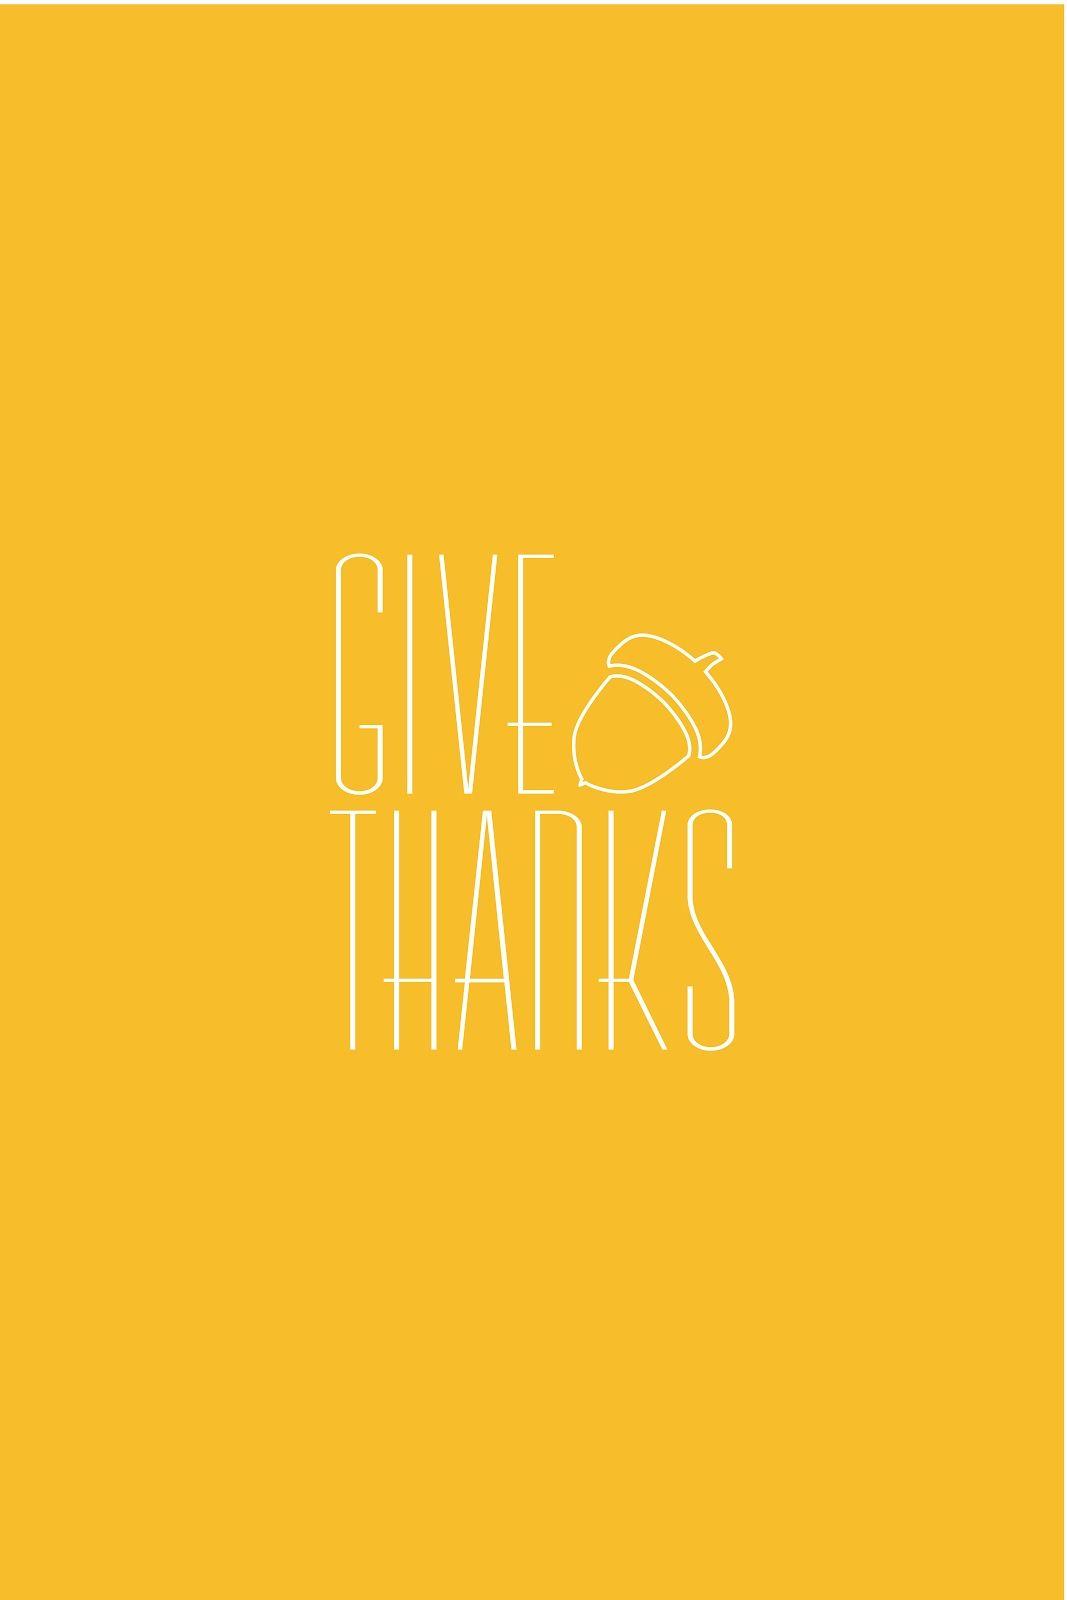 Virginia and Charlie: Give thanks for iPhone wallpaper